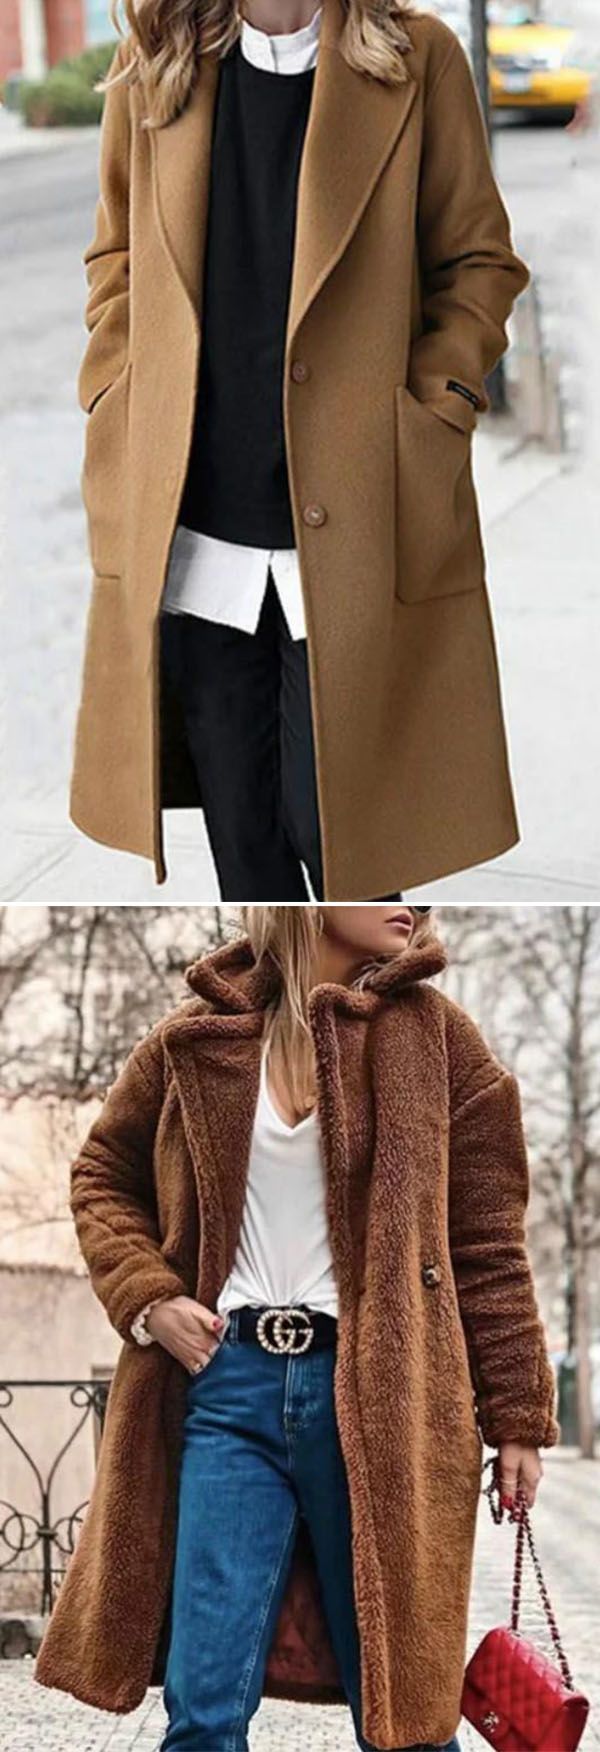 Hot Sale!Solid Pockets Lapel Shawl Collar Single-Breasted Winter Lady's Warm Coats -   23 work style beautiful
 ideas